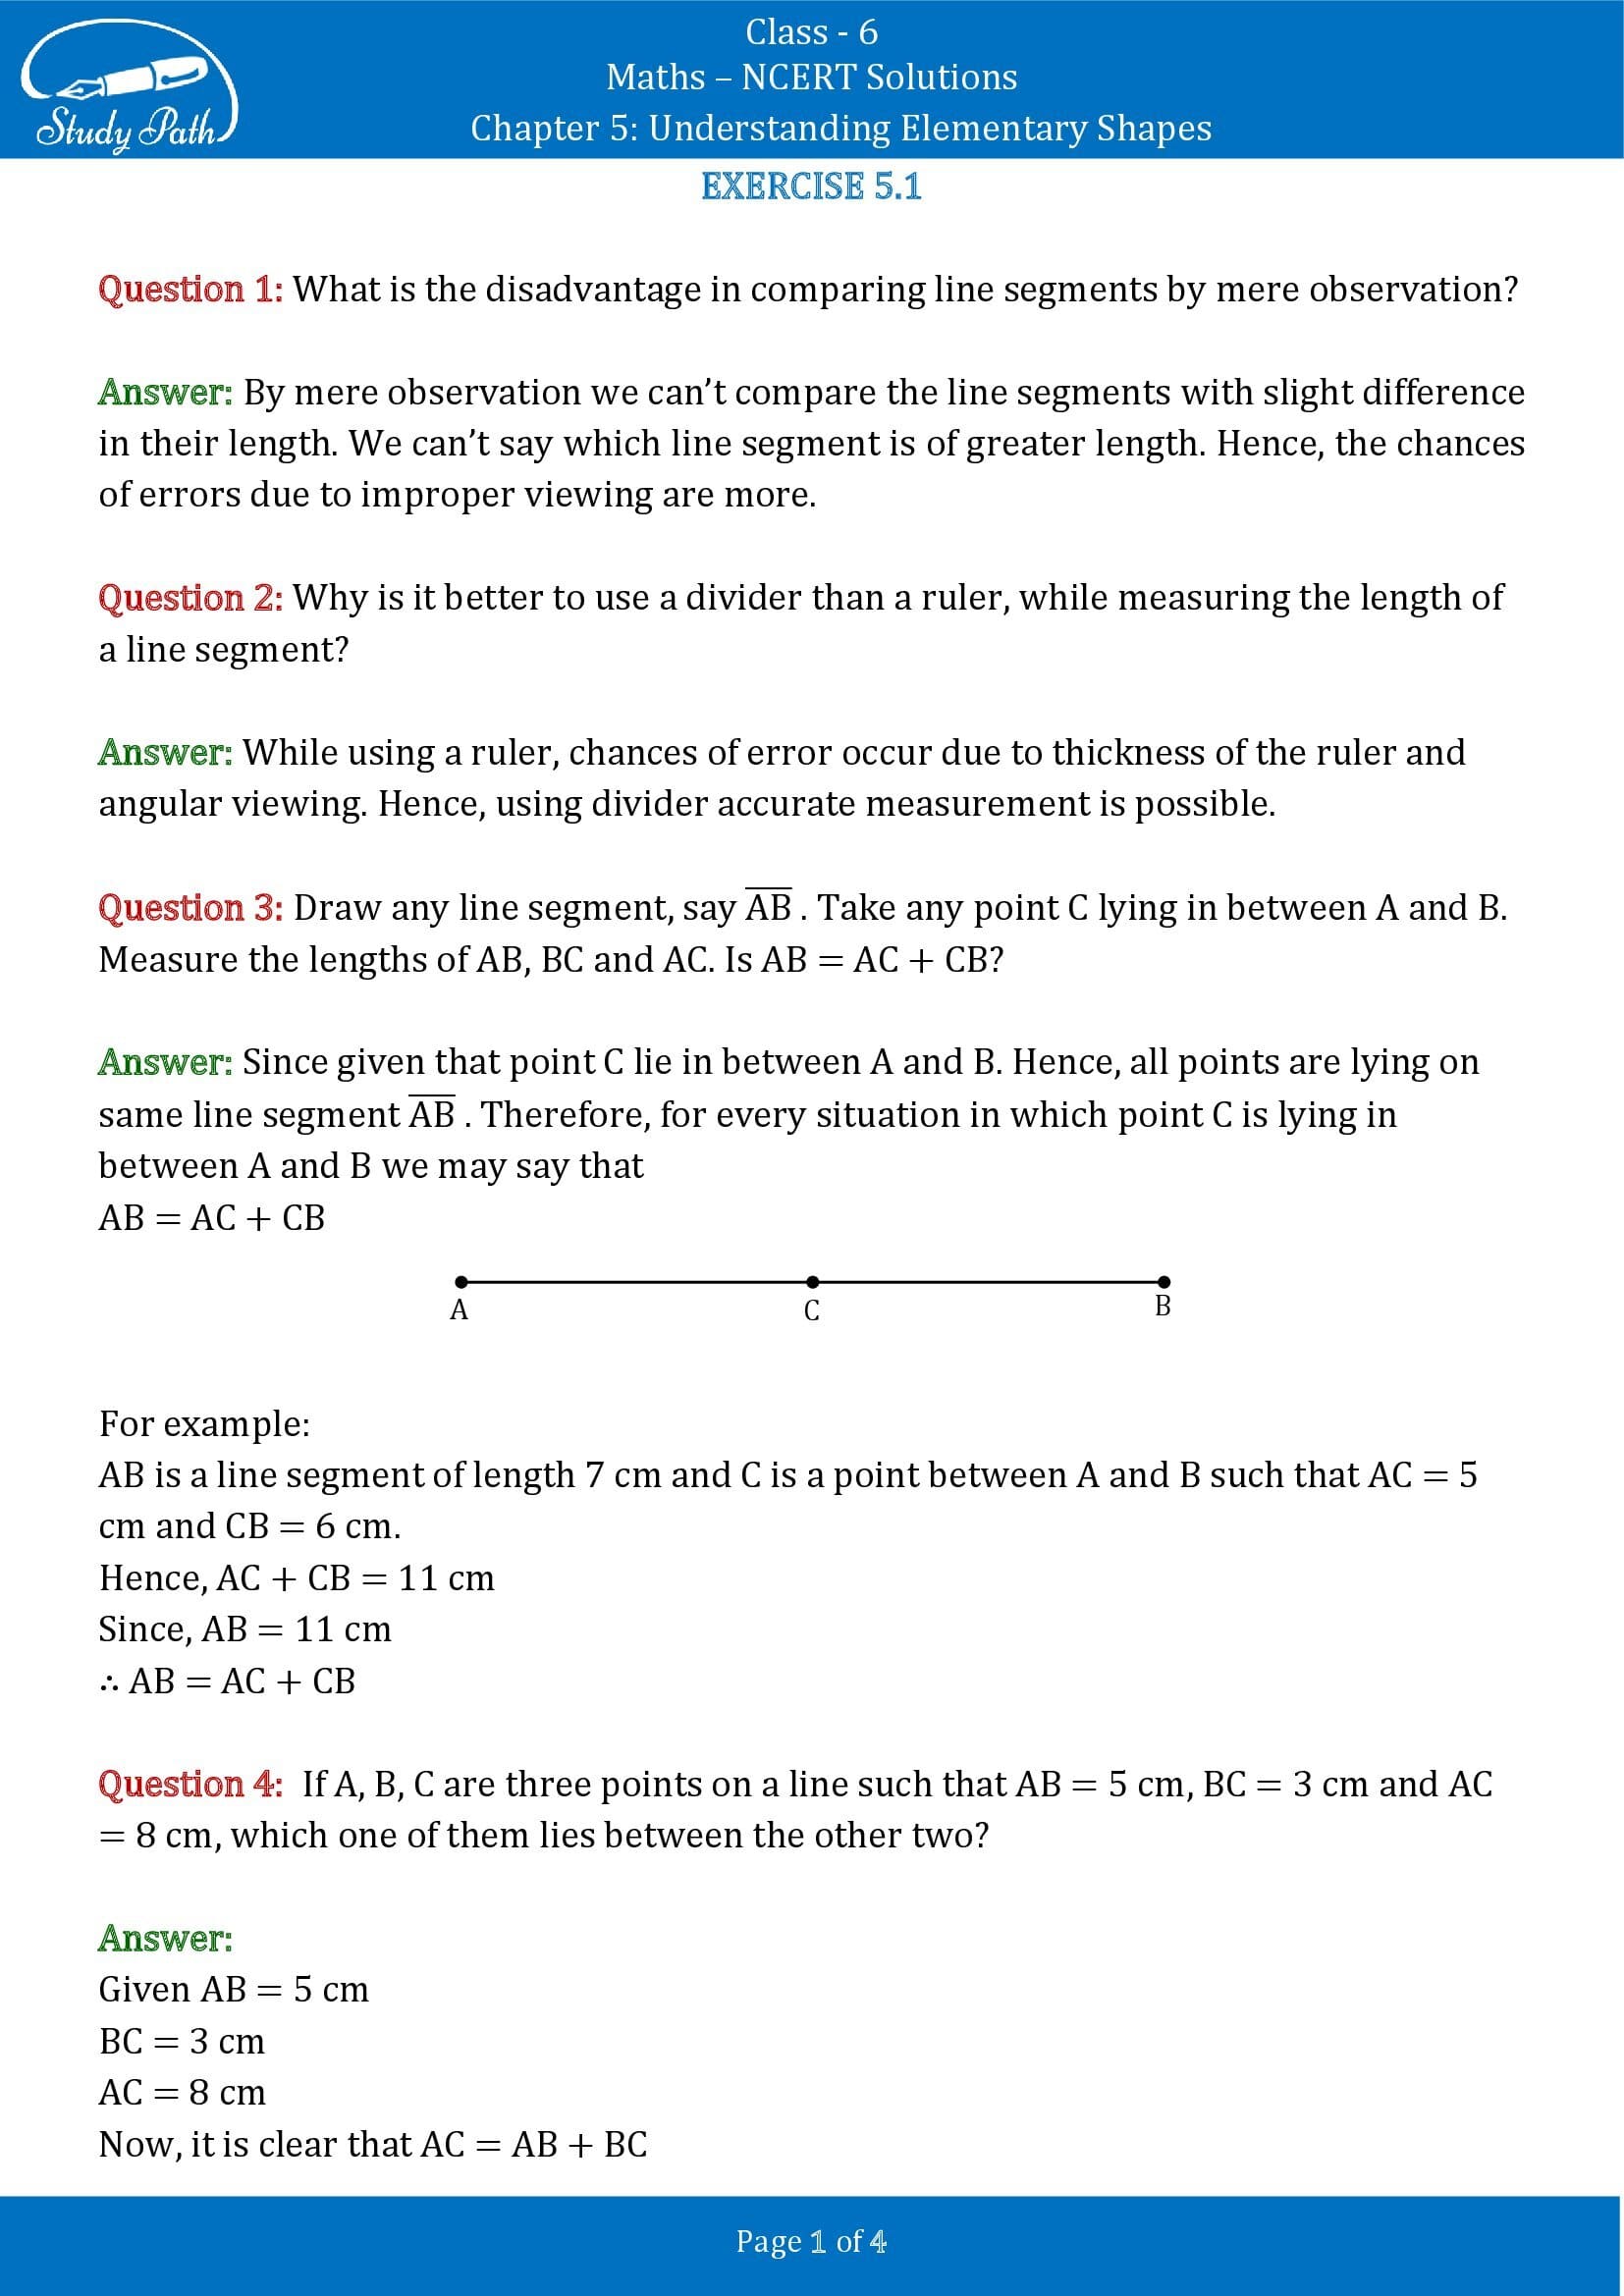 NCERT Solutions for Class 6 Maths Chapter 5 Understanding Elementary Shapes Exercise 5.1 00001